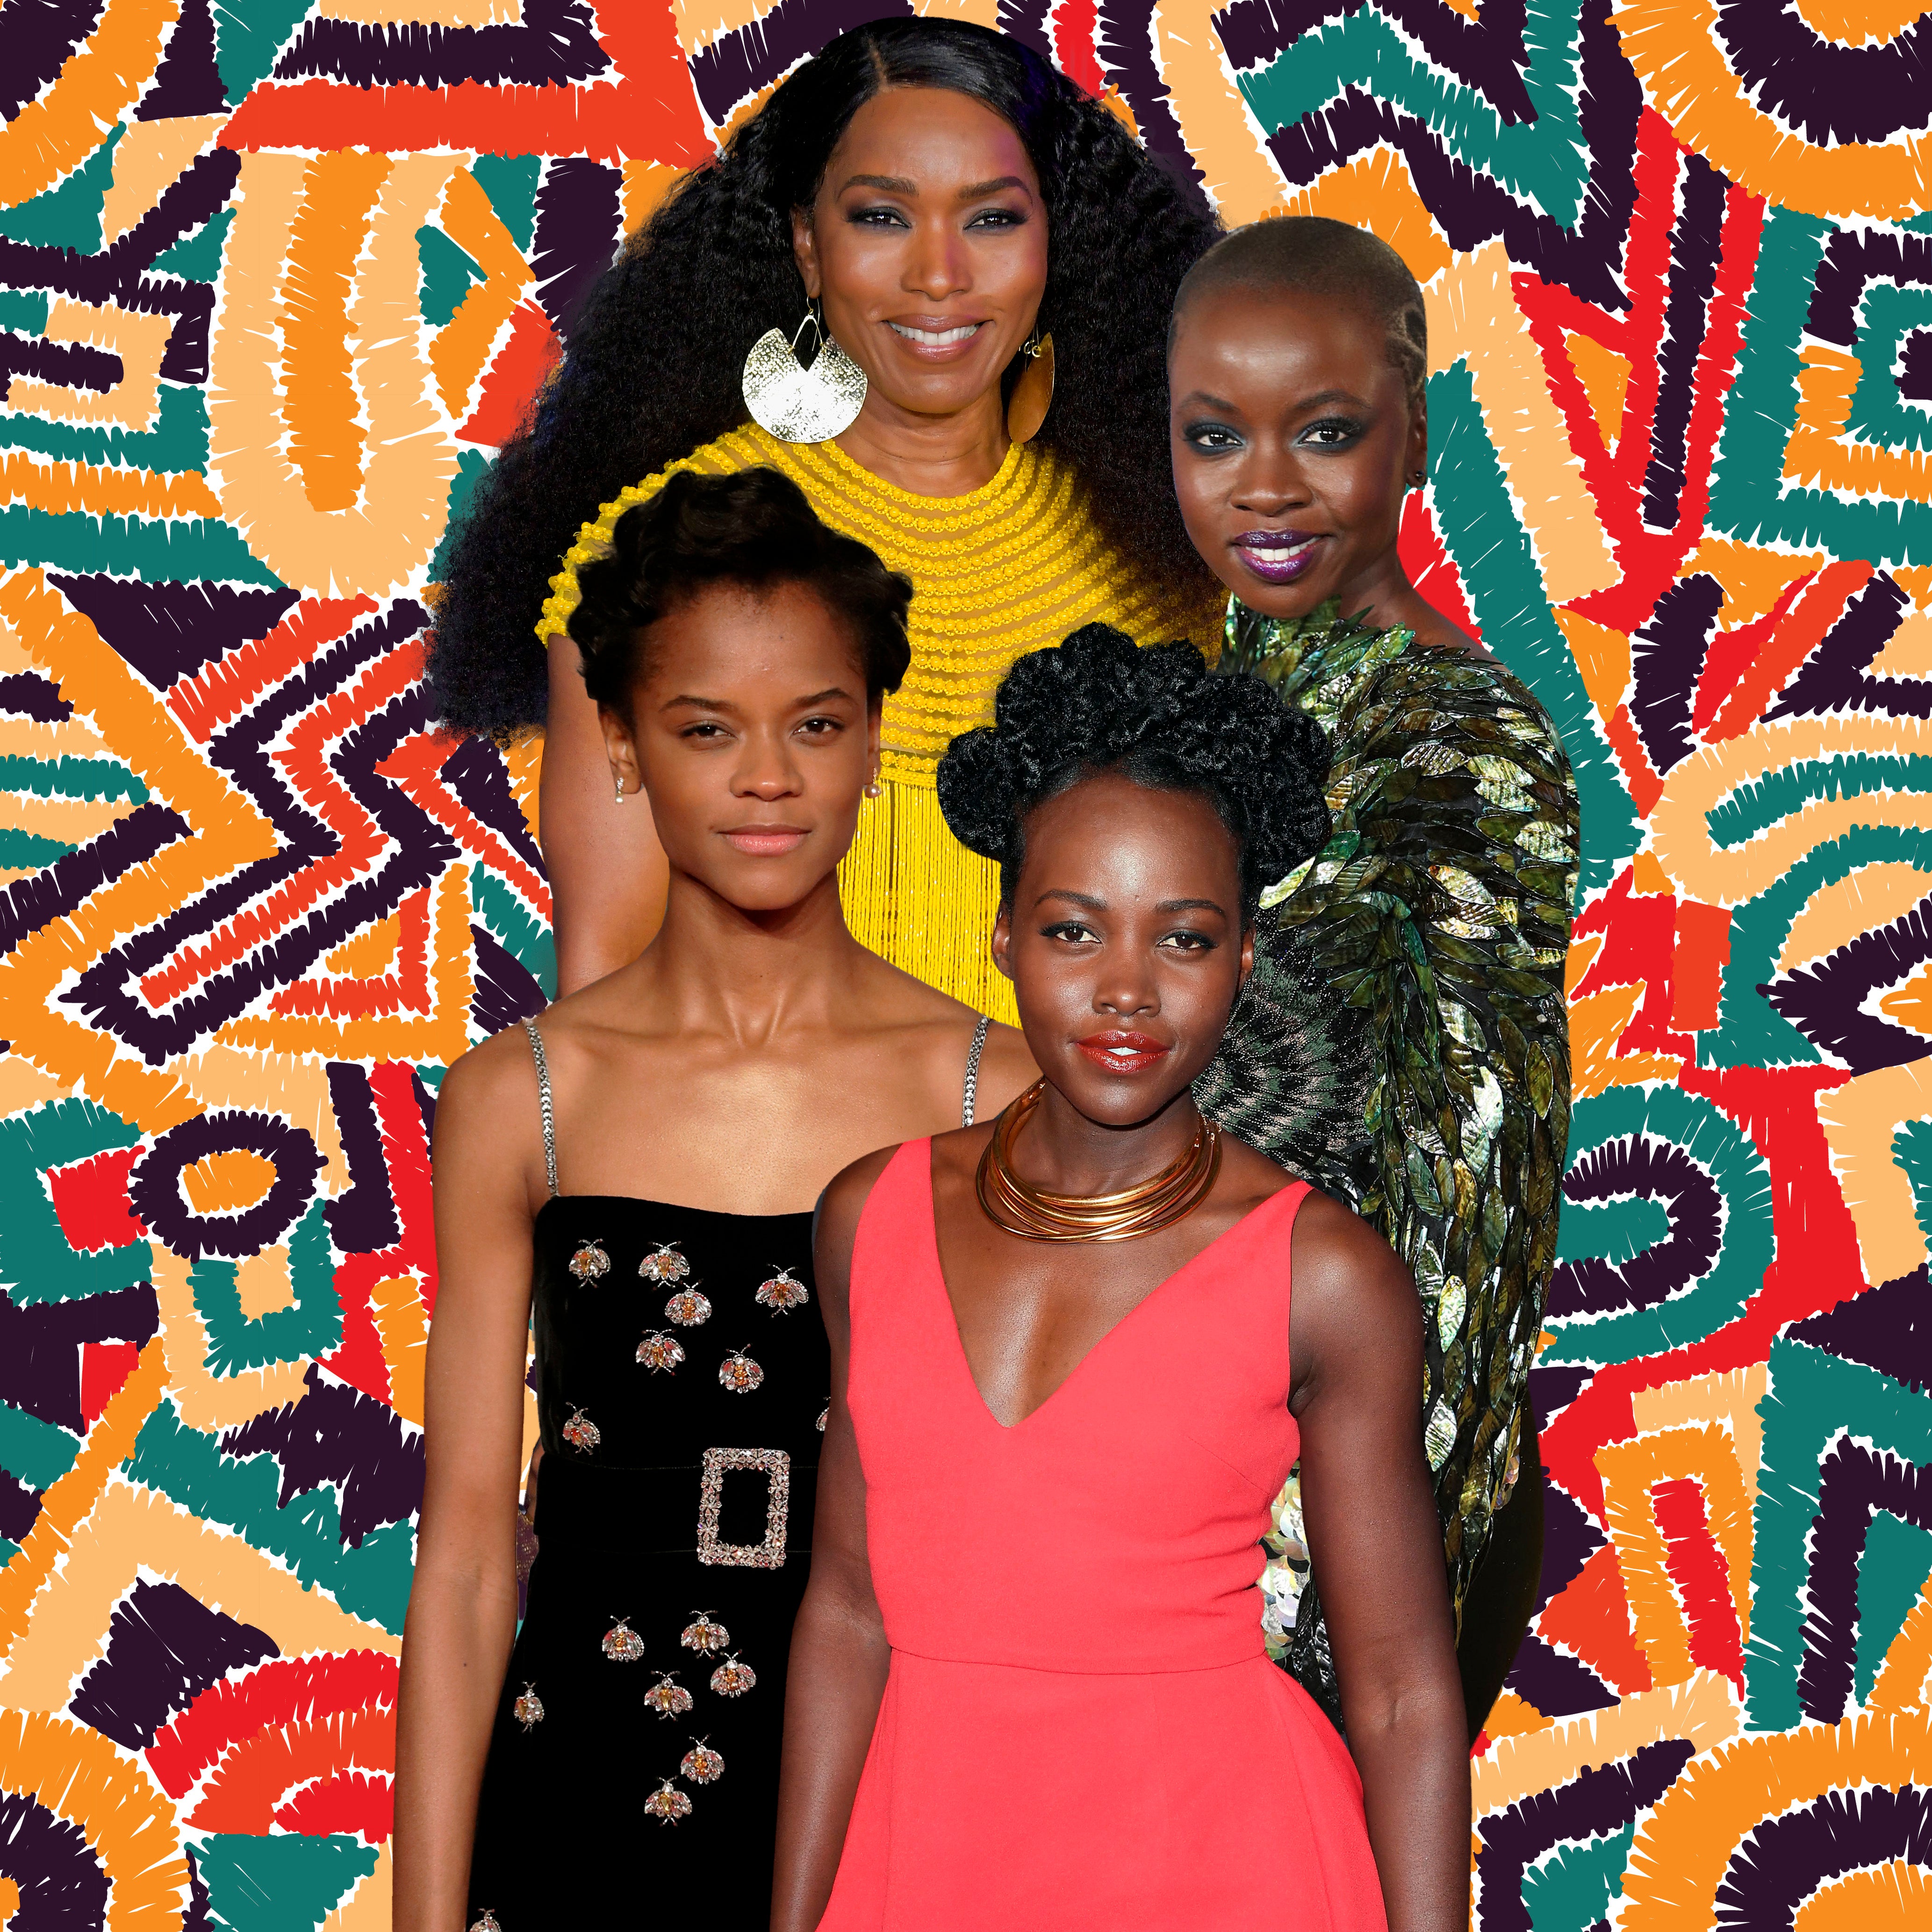 The Best Part Of ‘Black Panther?’ The Black Women